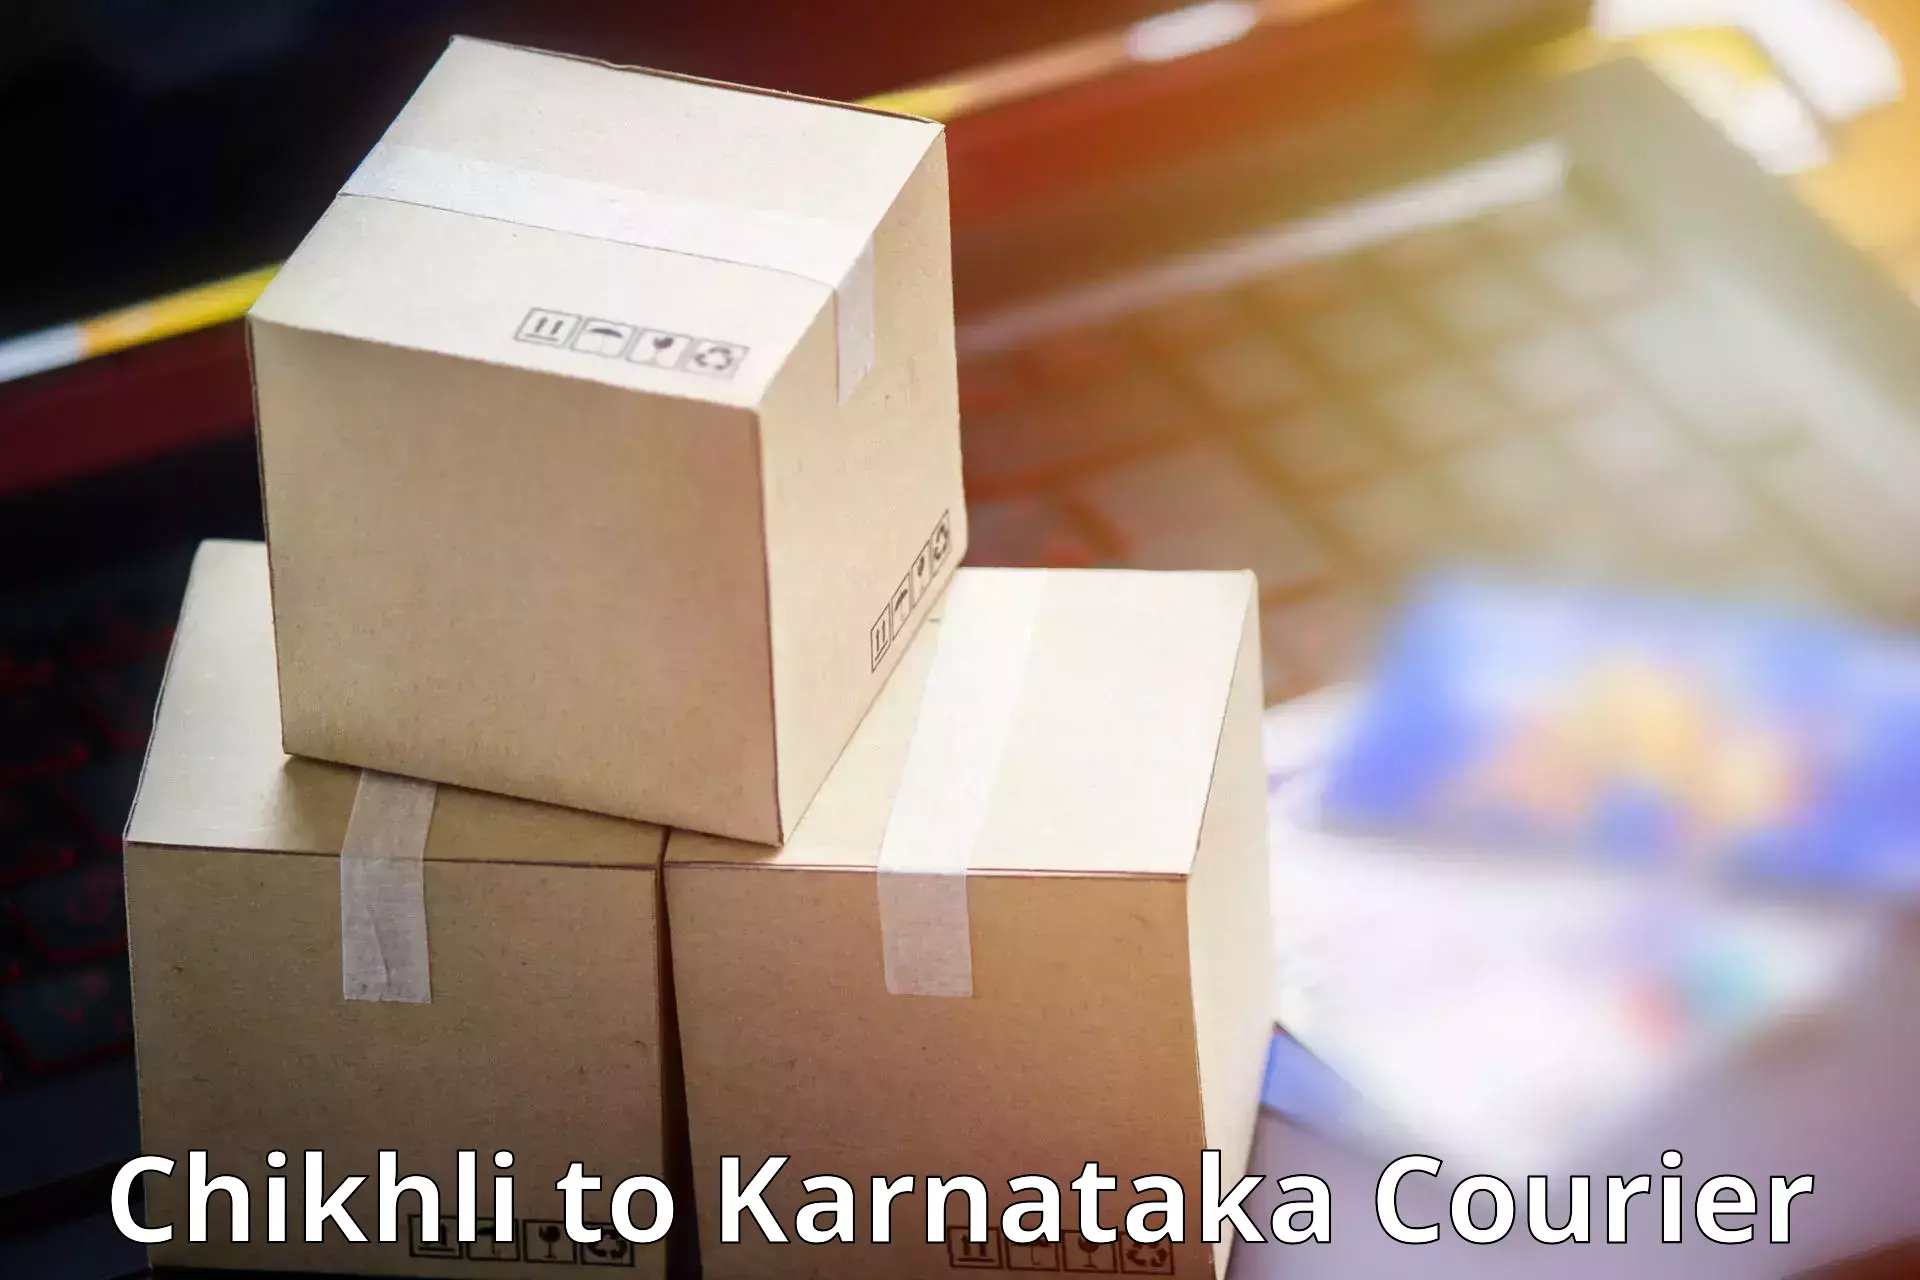 Trackable shipping service Chikhli to Bewoor